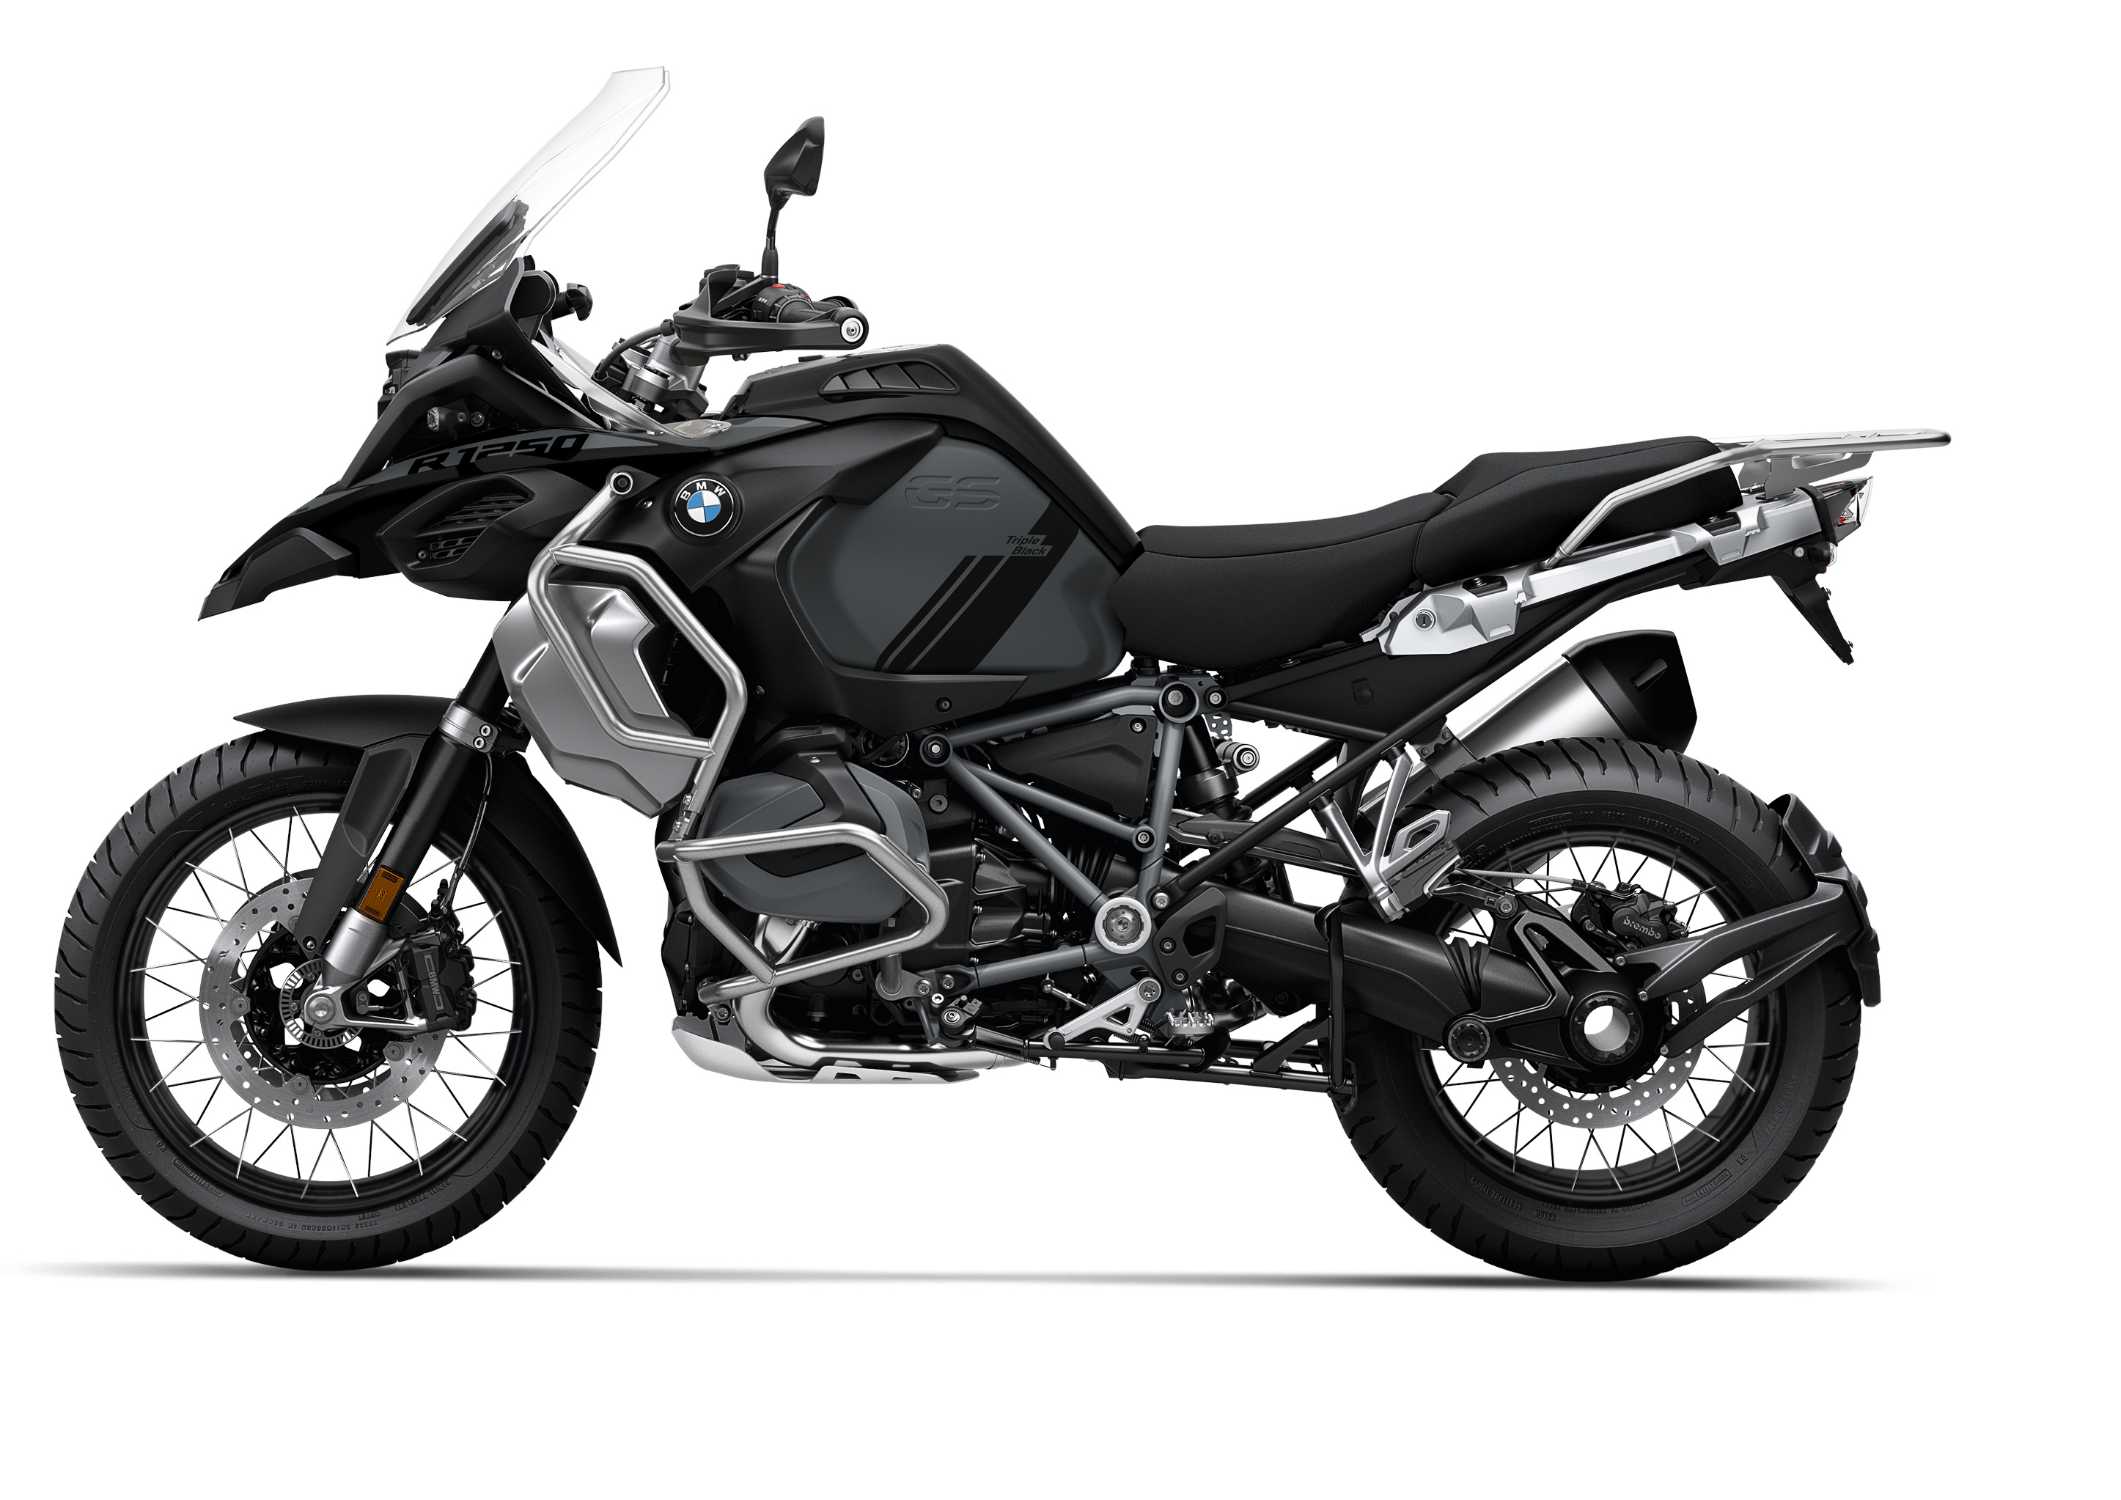 Studio takes of the new BMW R 1250 GS Adventure, Style